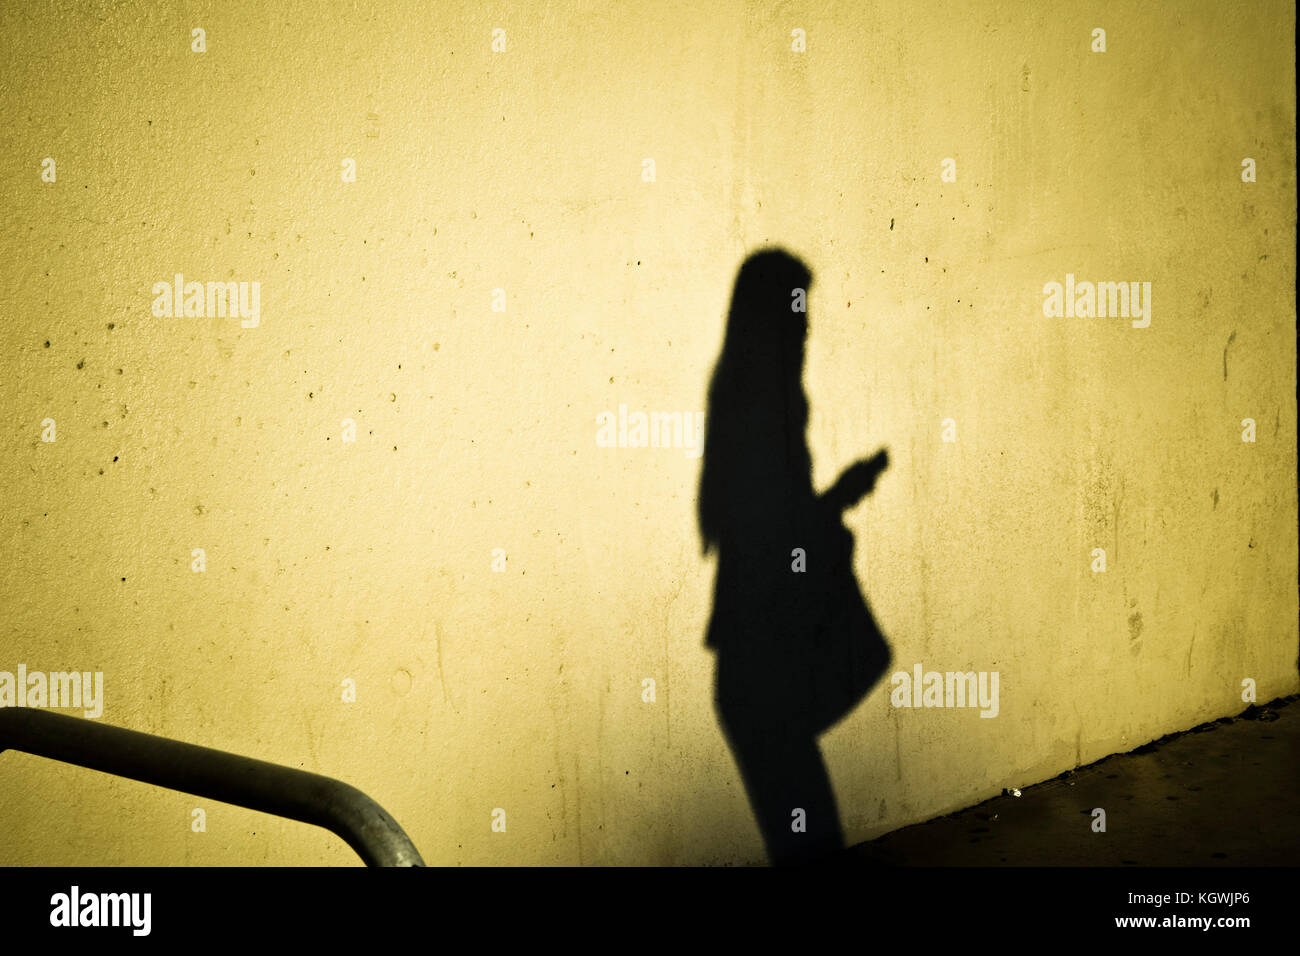 Silhouette of woman holding mobile, shadow on a wall. Stock Photo